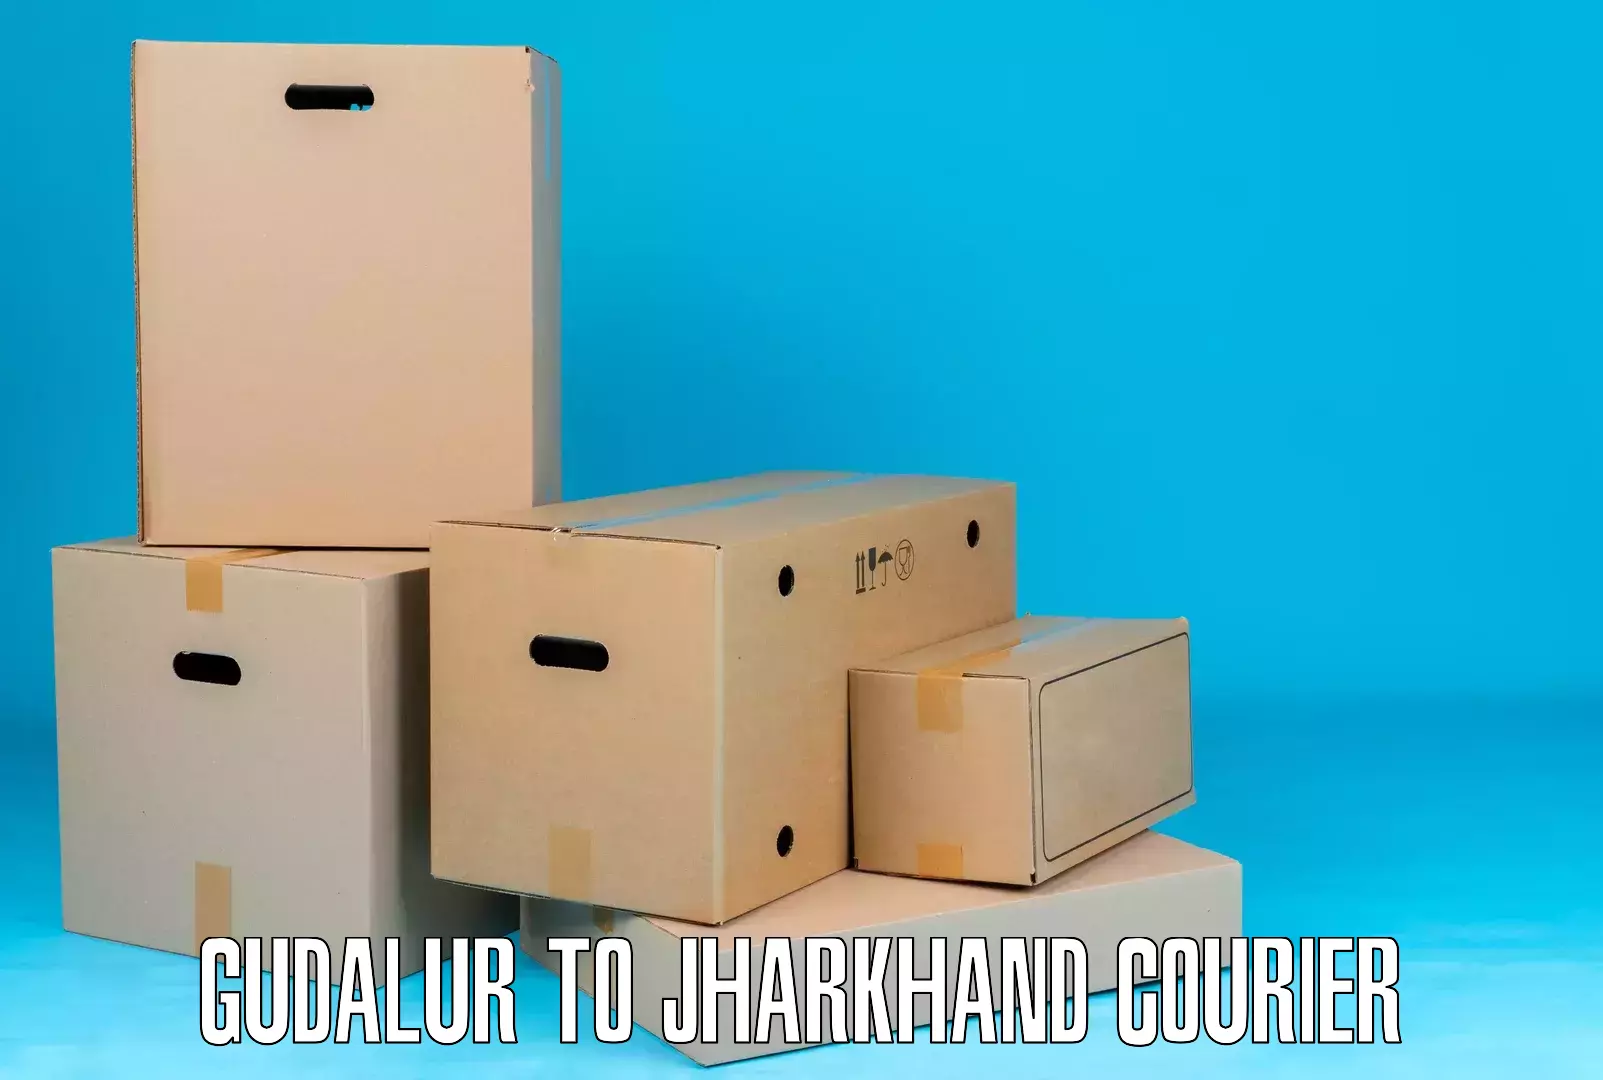 Nationwide parcel services Gudalur to Barkagaon